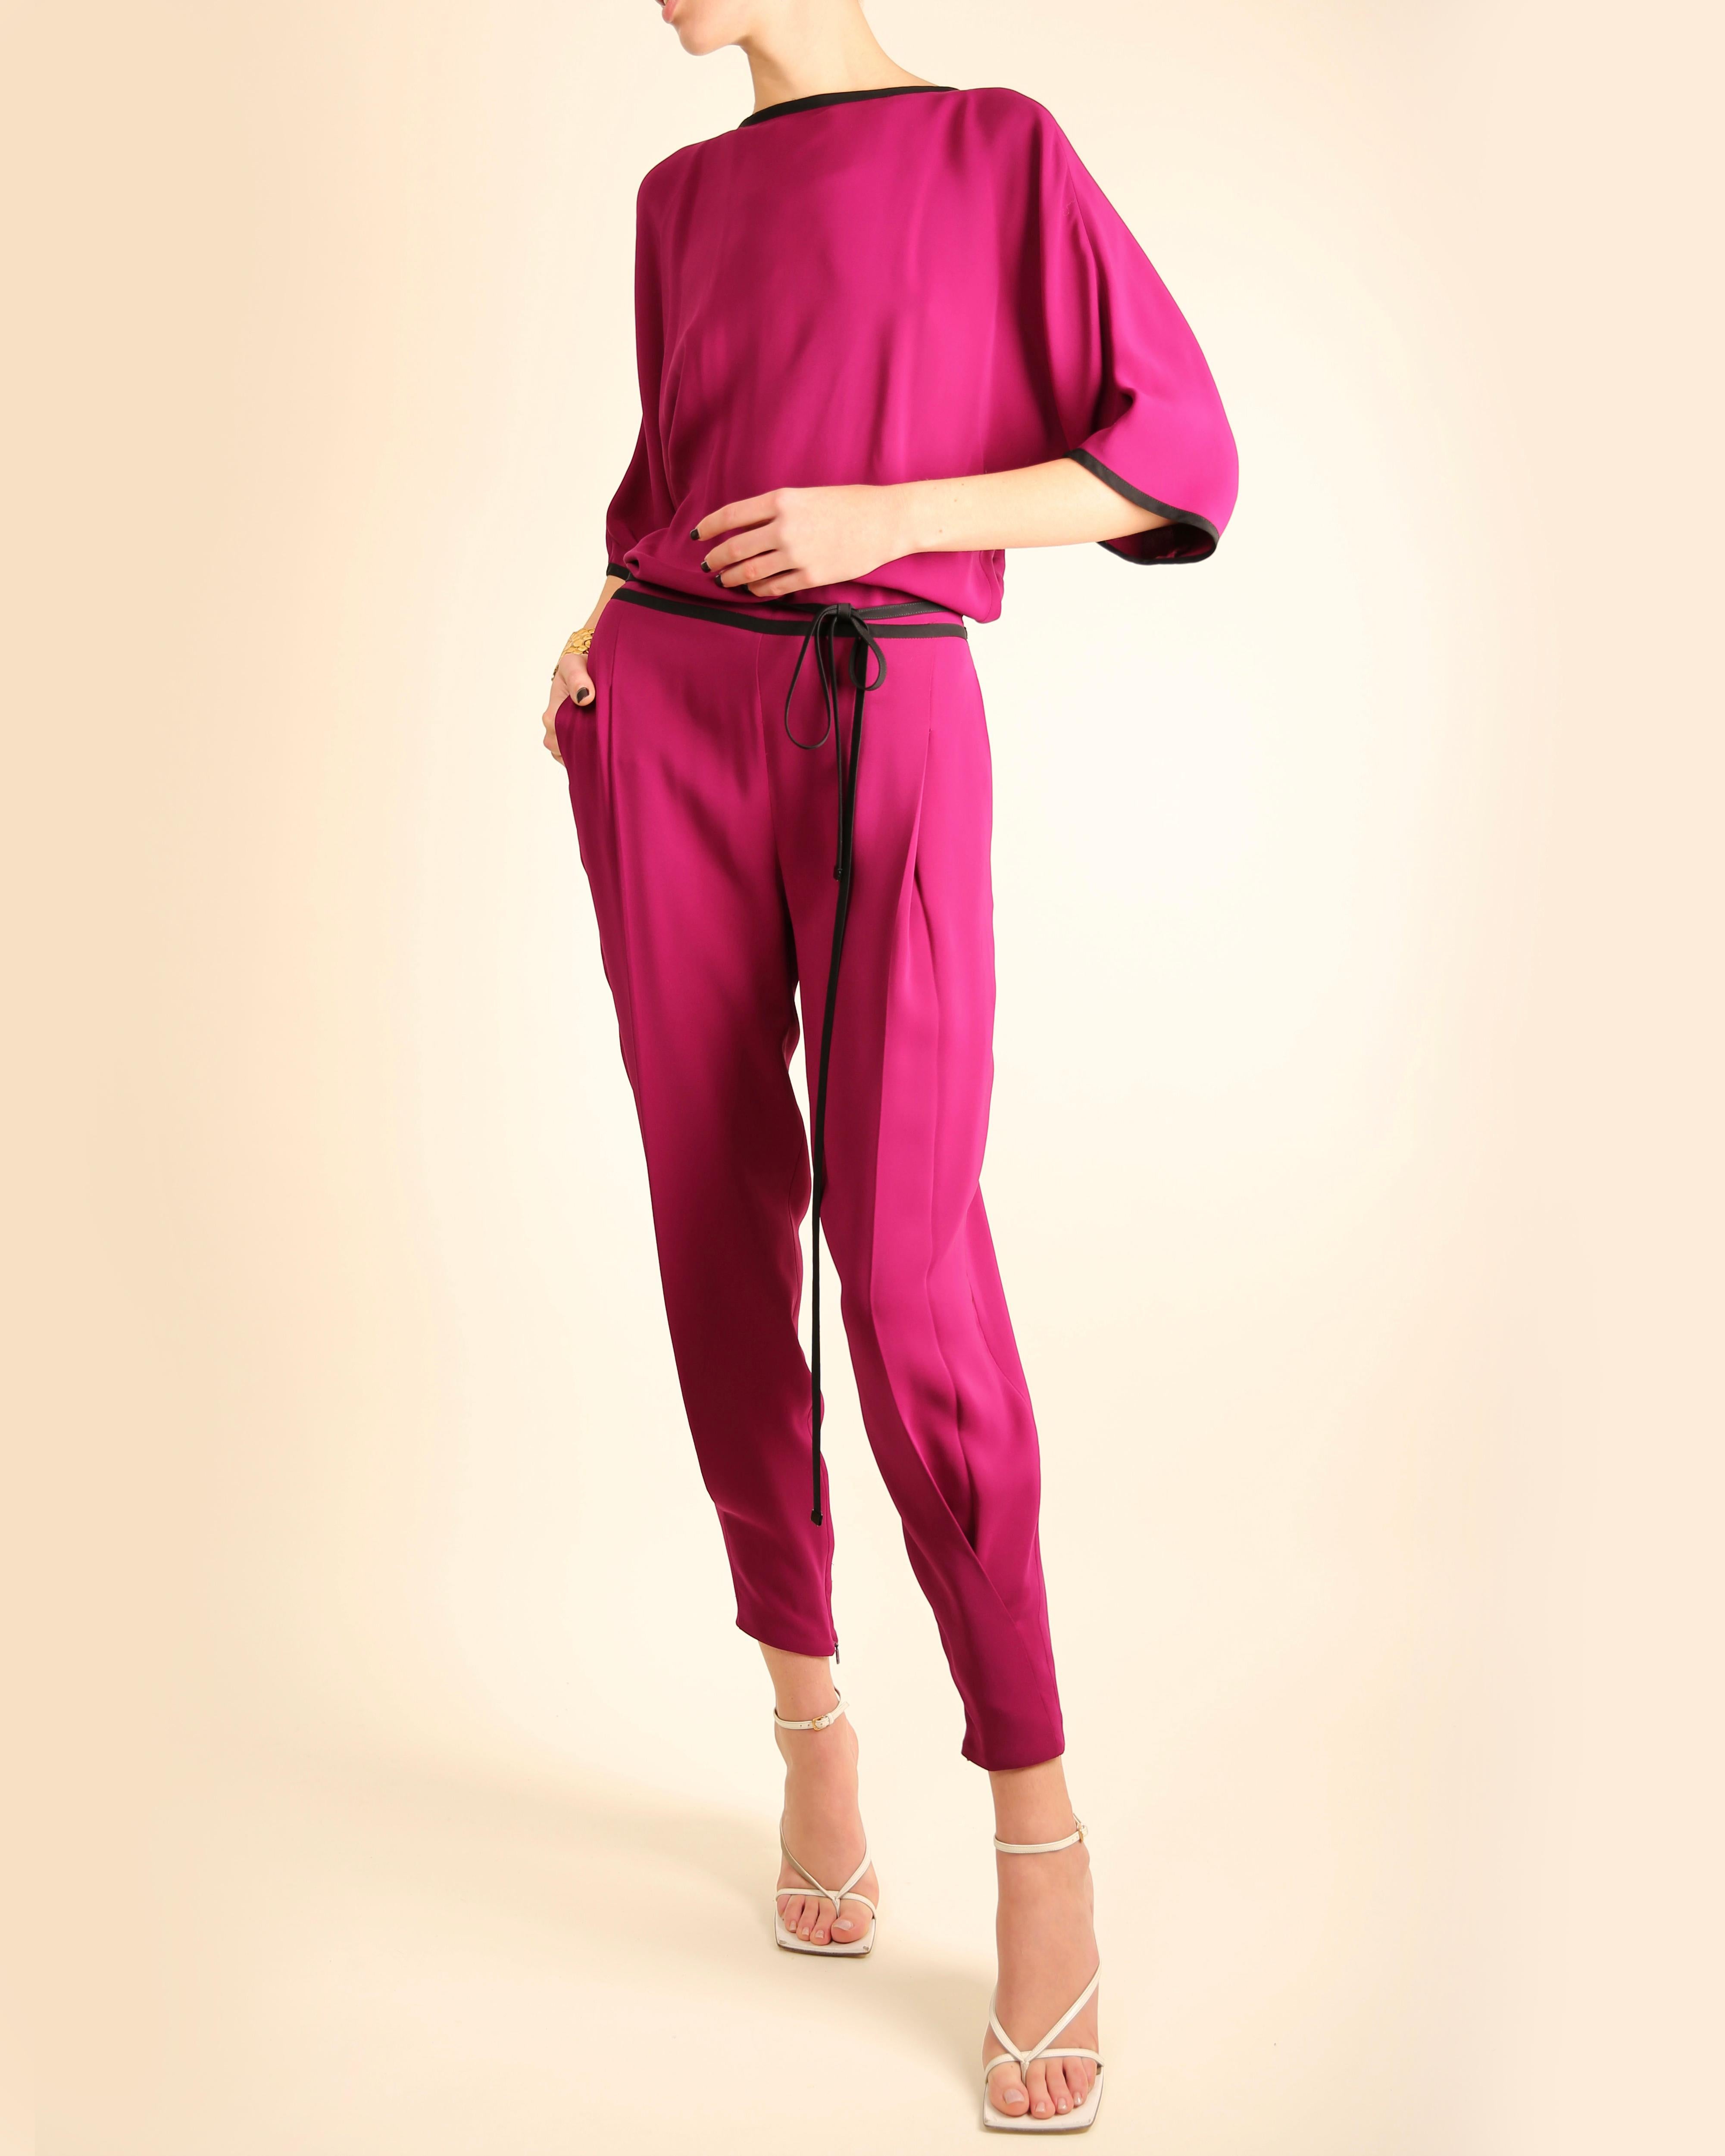 Gucci S/S 2014 silk magenta black backless dolman tapered pant jumpsuit  In Excellent Condition For Sale In Paris, FR